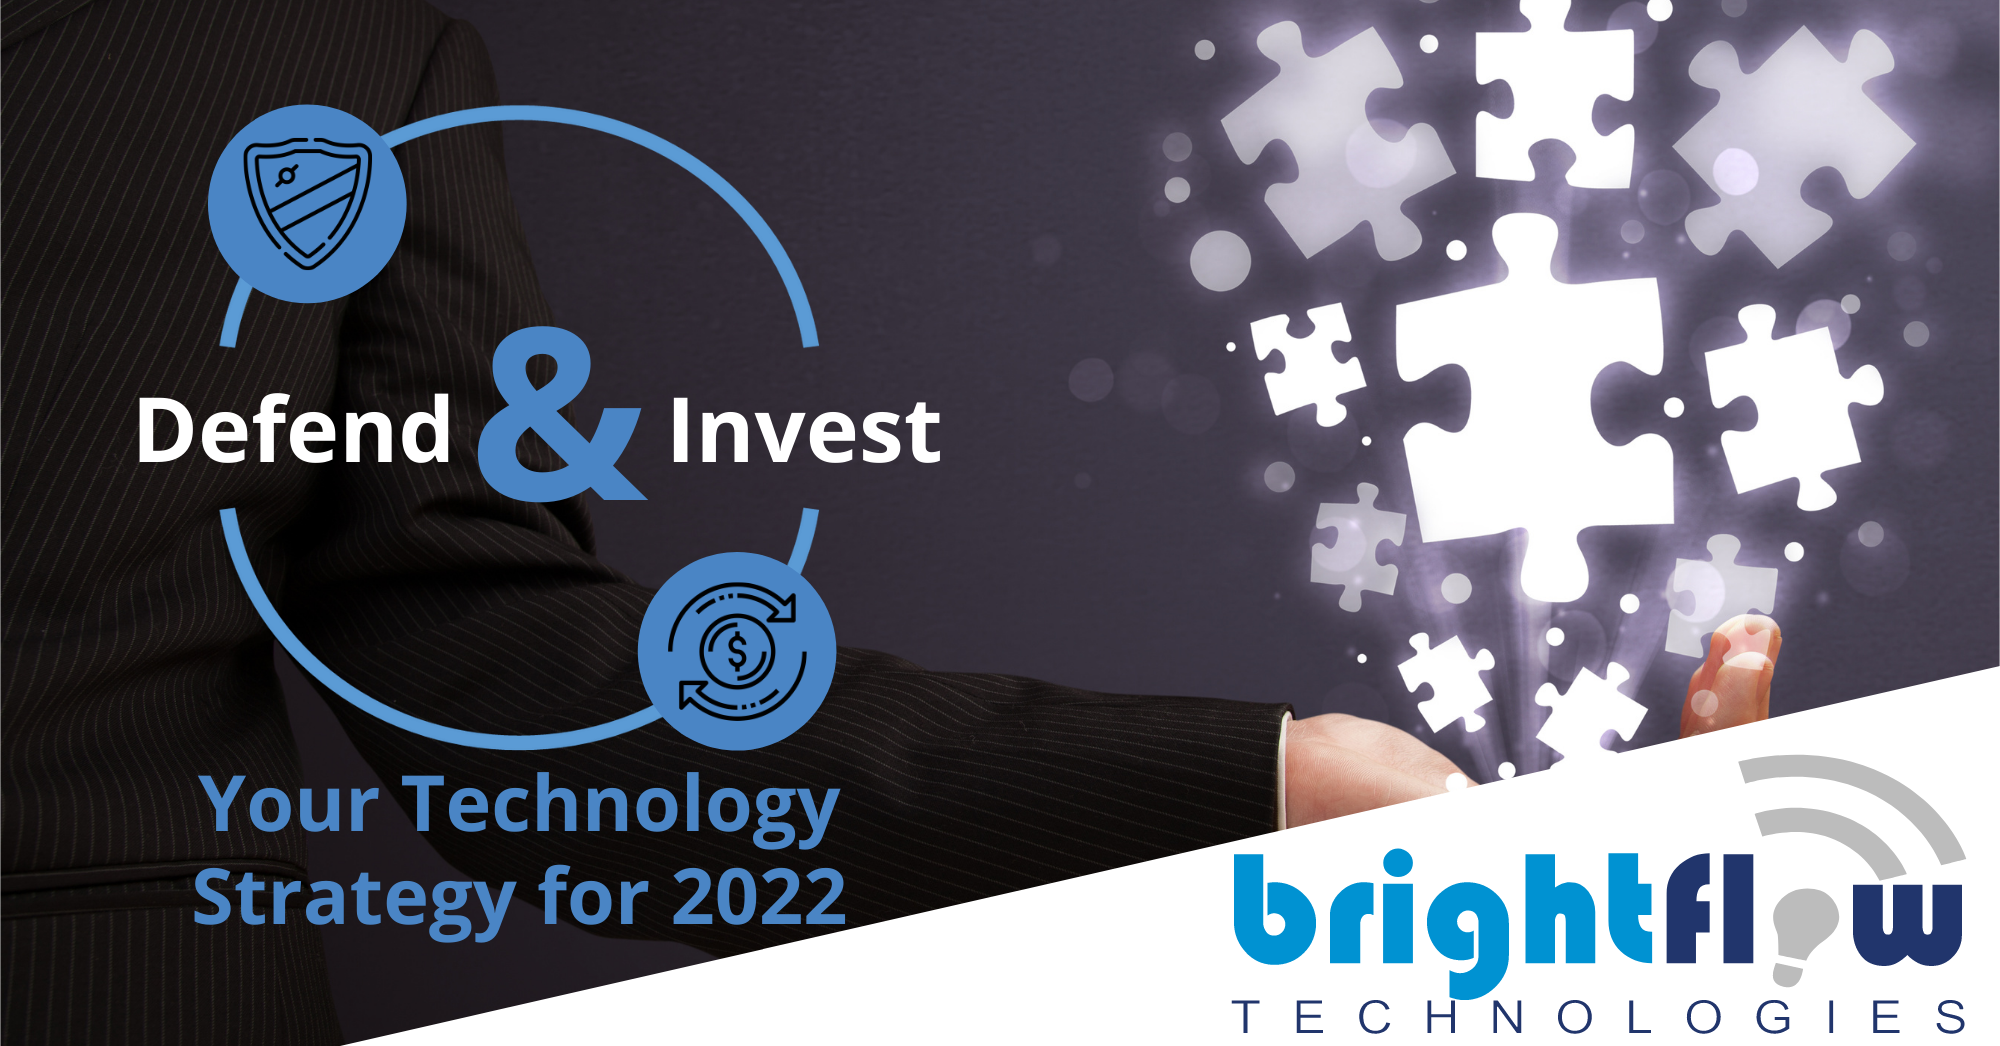 Defend and Invest: Your Technology Strategy for 2022